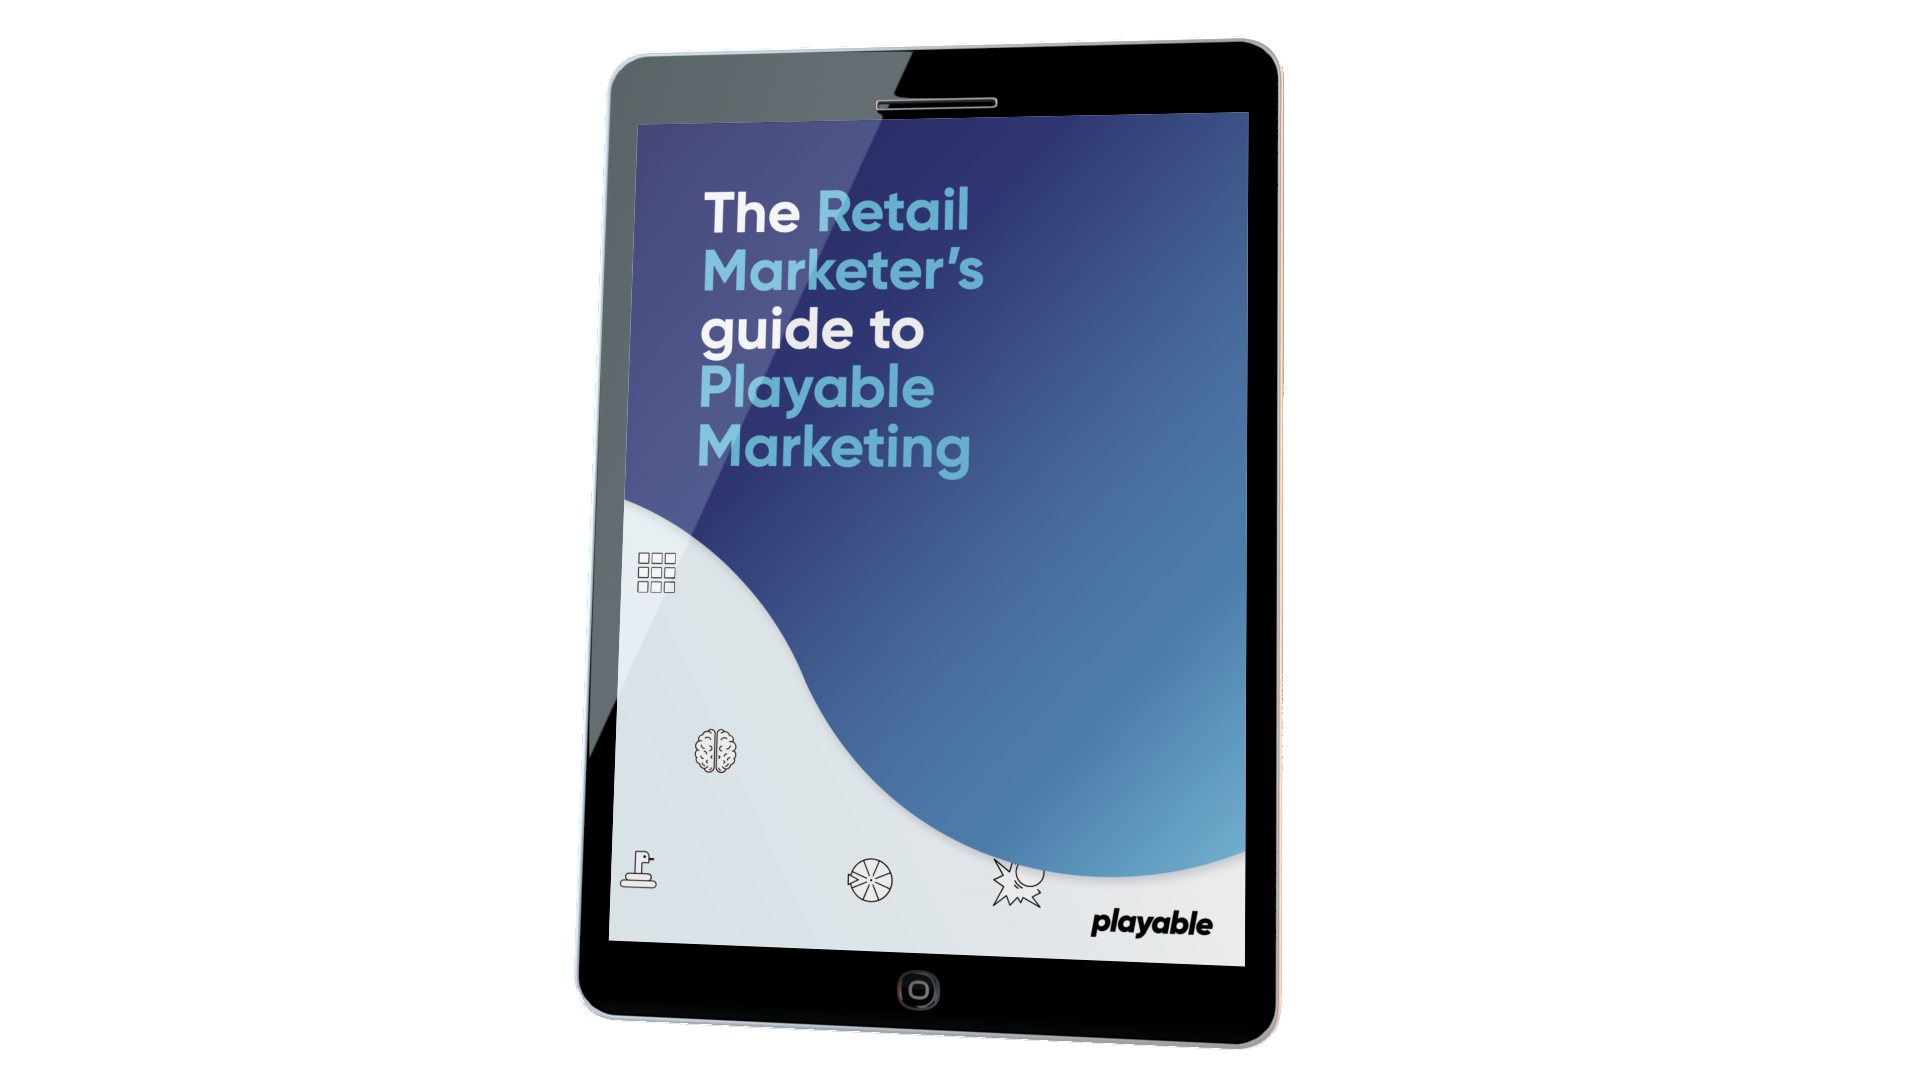 Retail marketers guide to playable marketing image